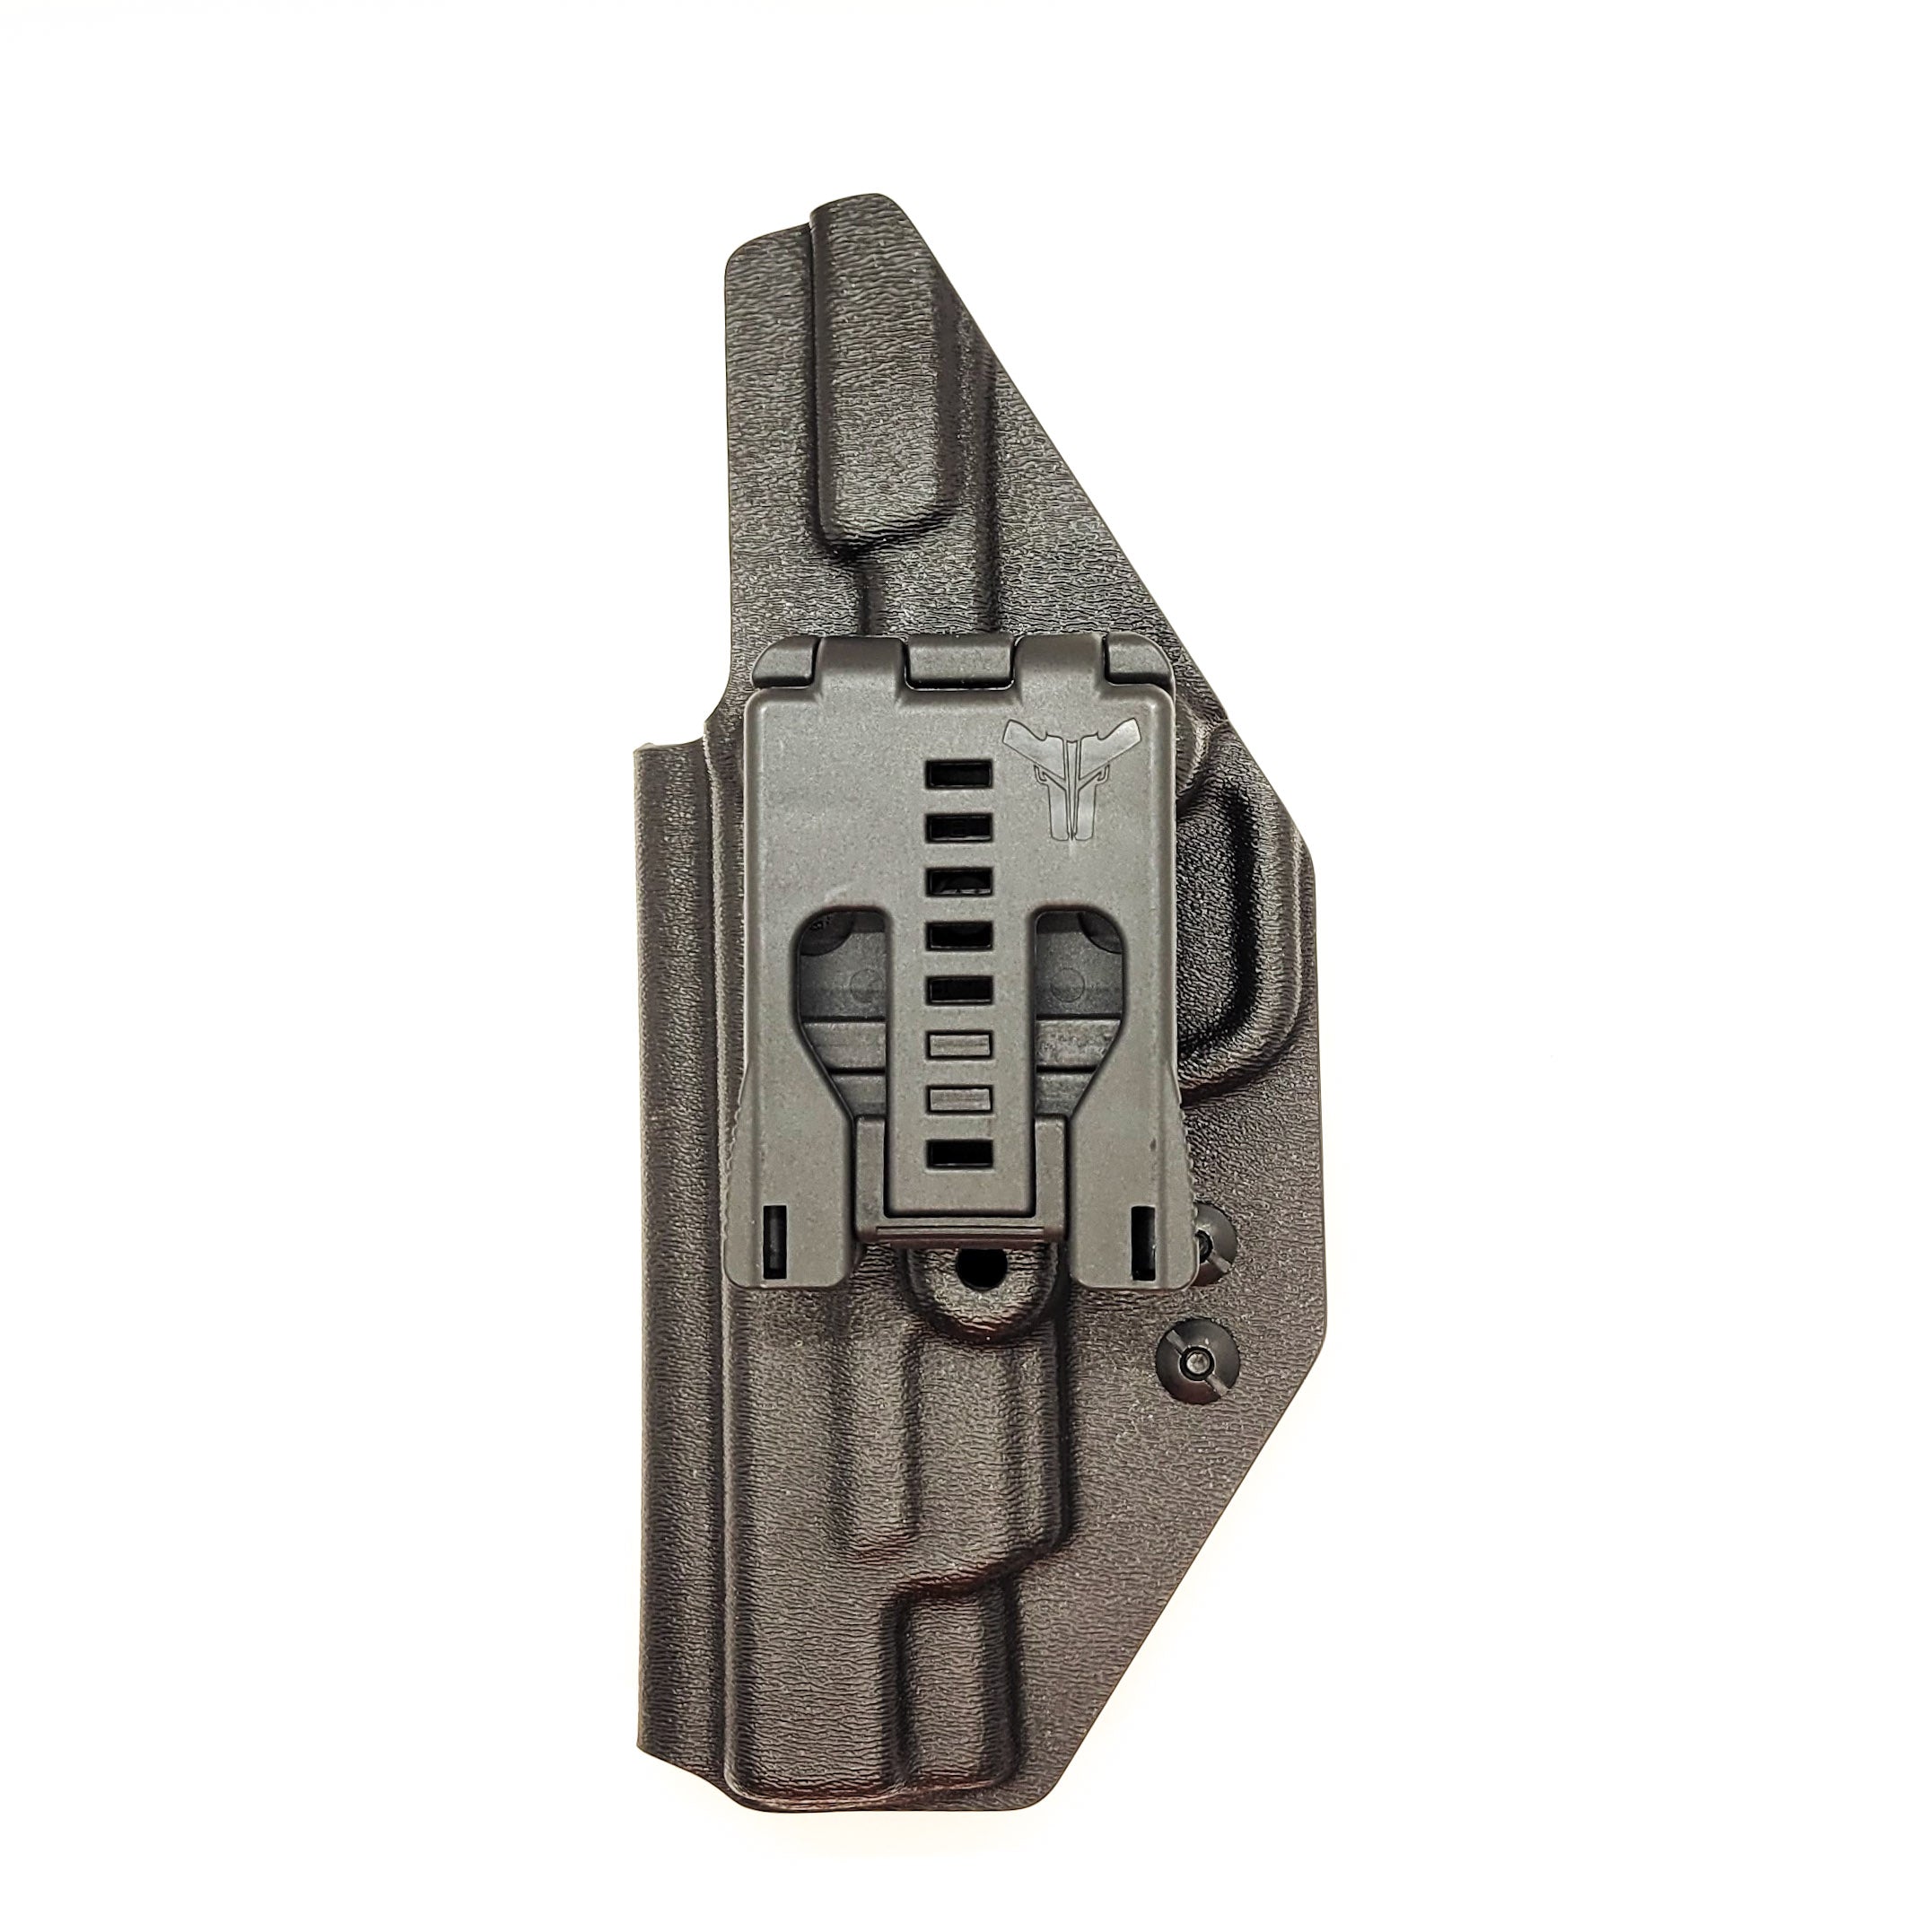 Outside Waistband Kydex Taco Style Holster designed to fit the Smith and Wesson M&P 10MM M2.0 pistol with thumb safety. The holster is designed to fit both the 4" and 4.6" barrel lengths. Full sweat guard, adjustable retention, profiled for a red dot sight. Proudly made in the USA for veterans and law enforcement.